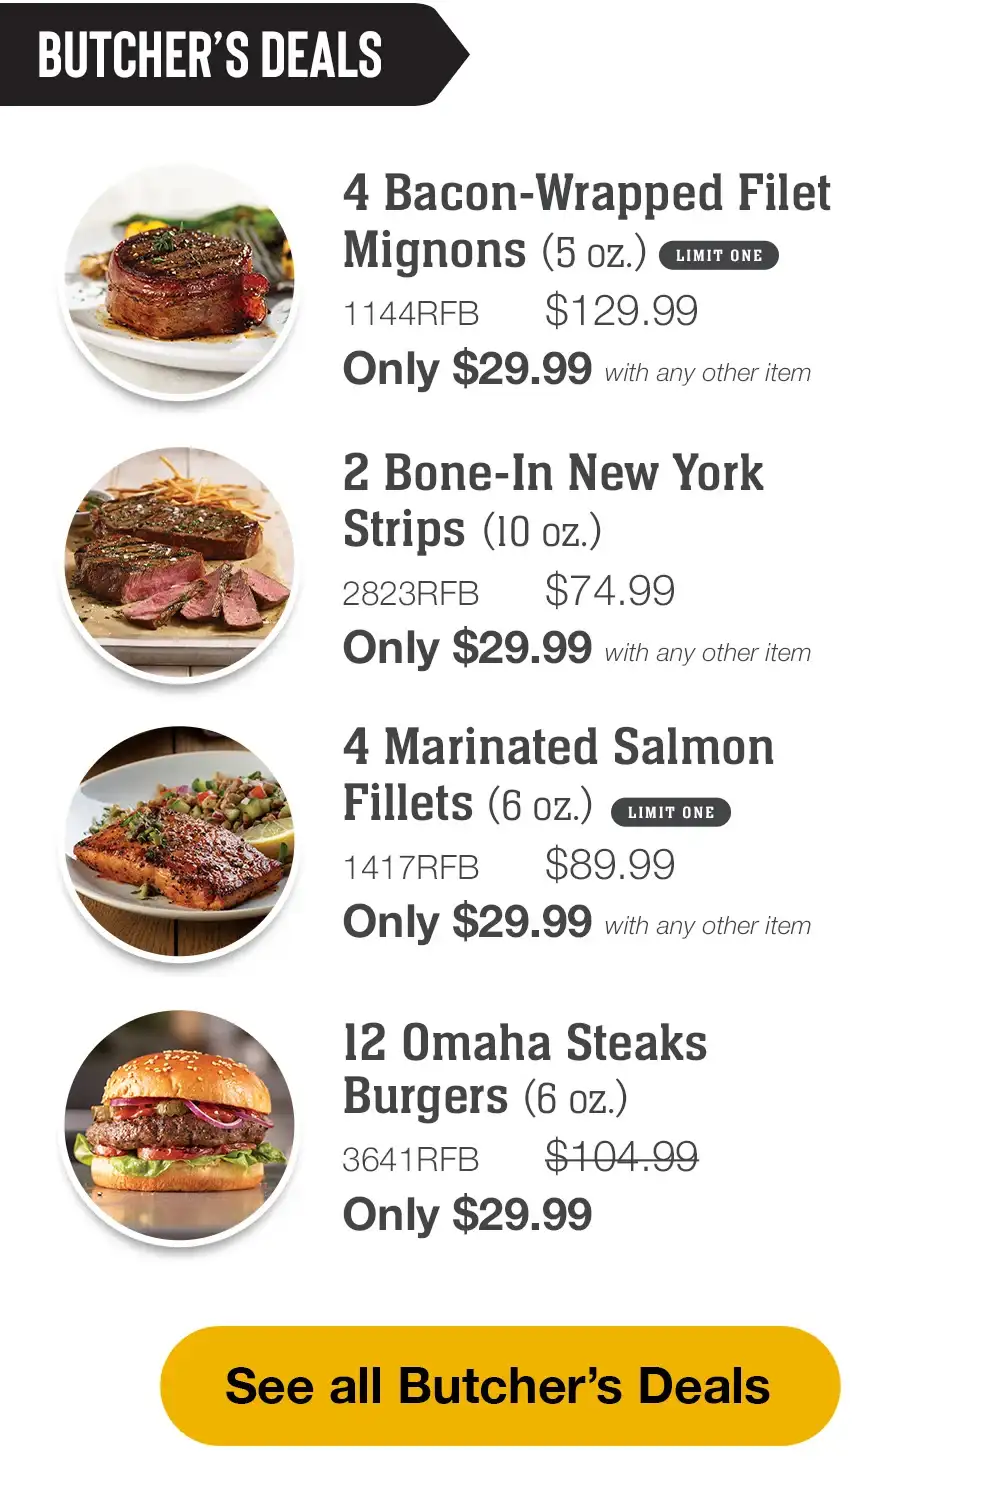 BUTCHER'S DEALS | 2 Bone-In New York Strips (10 oz.) - 2823RFB \\$74.99 Only \\$29.99 with any other item | 4 Marinated Salmon Fillets (6 oz.) - 1417RFB \\$89.99 Only \\$29.99 with any other item | 1 Fully Cooked Beef Pot Roast (2 lbs.) - 1163RFB \\$79.99 Only \\$29.99 with any other item | 12 Omaha Steaks Burgers (6 oz.) - 3641RFB \\$104.99 Only \\$29.99 || See all Butcher's Deals